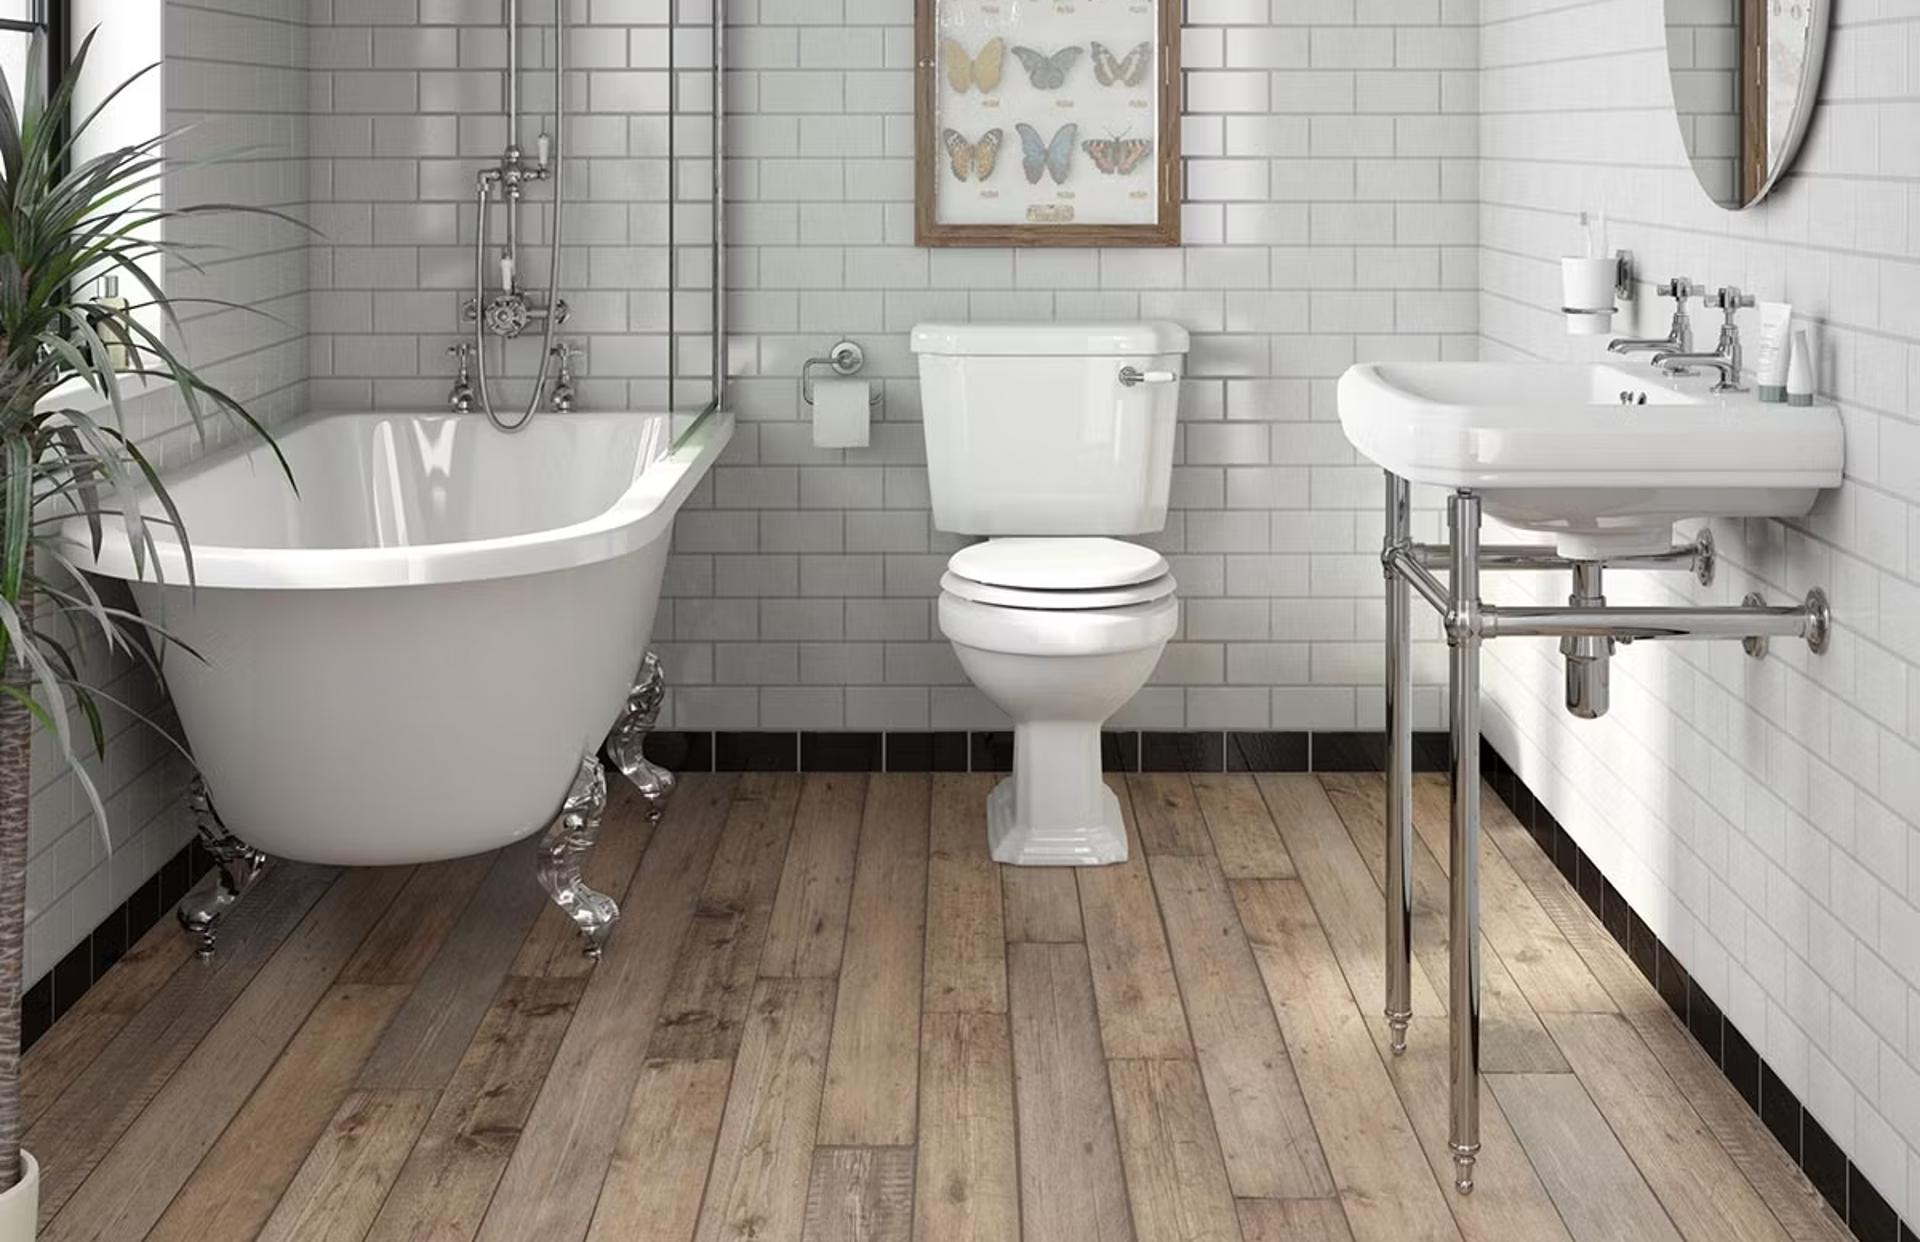 Bathroom retailer acquired in pre-pack deal